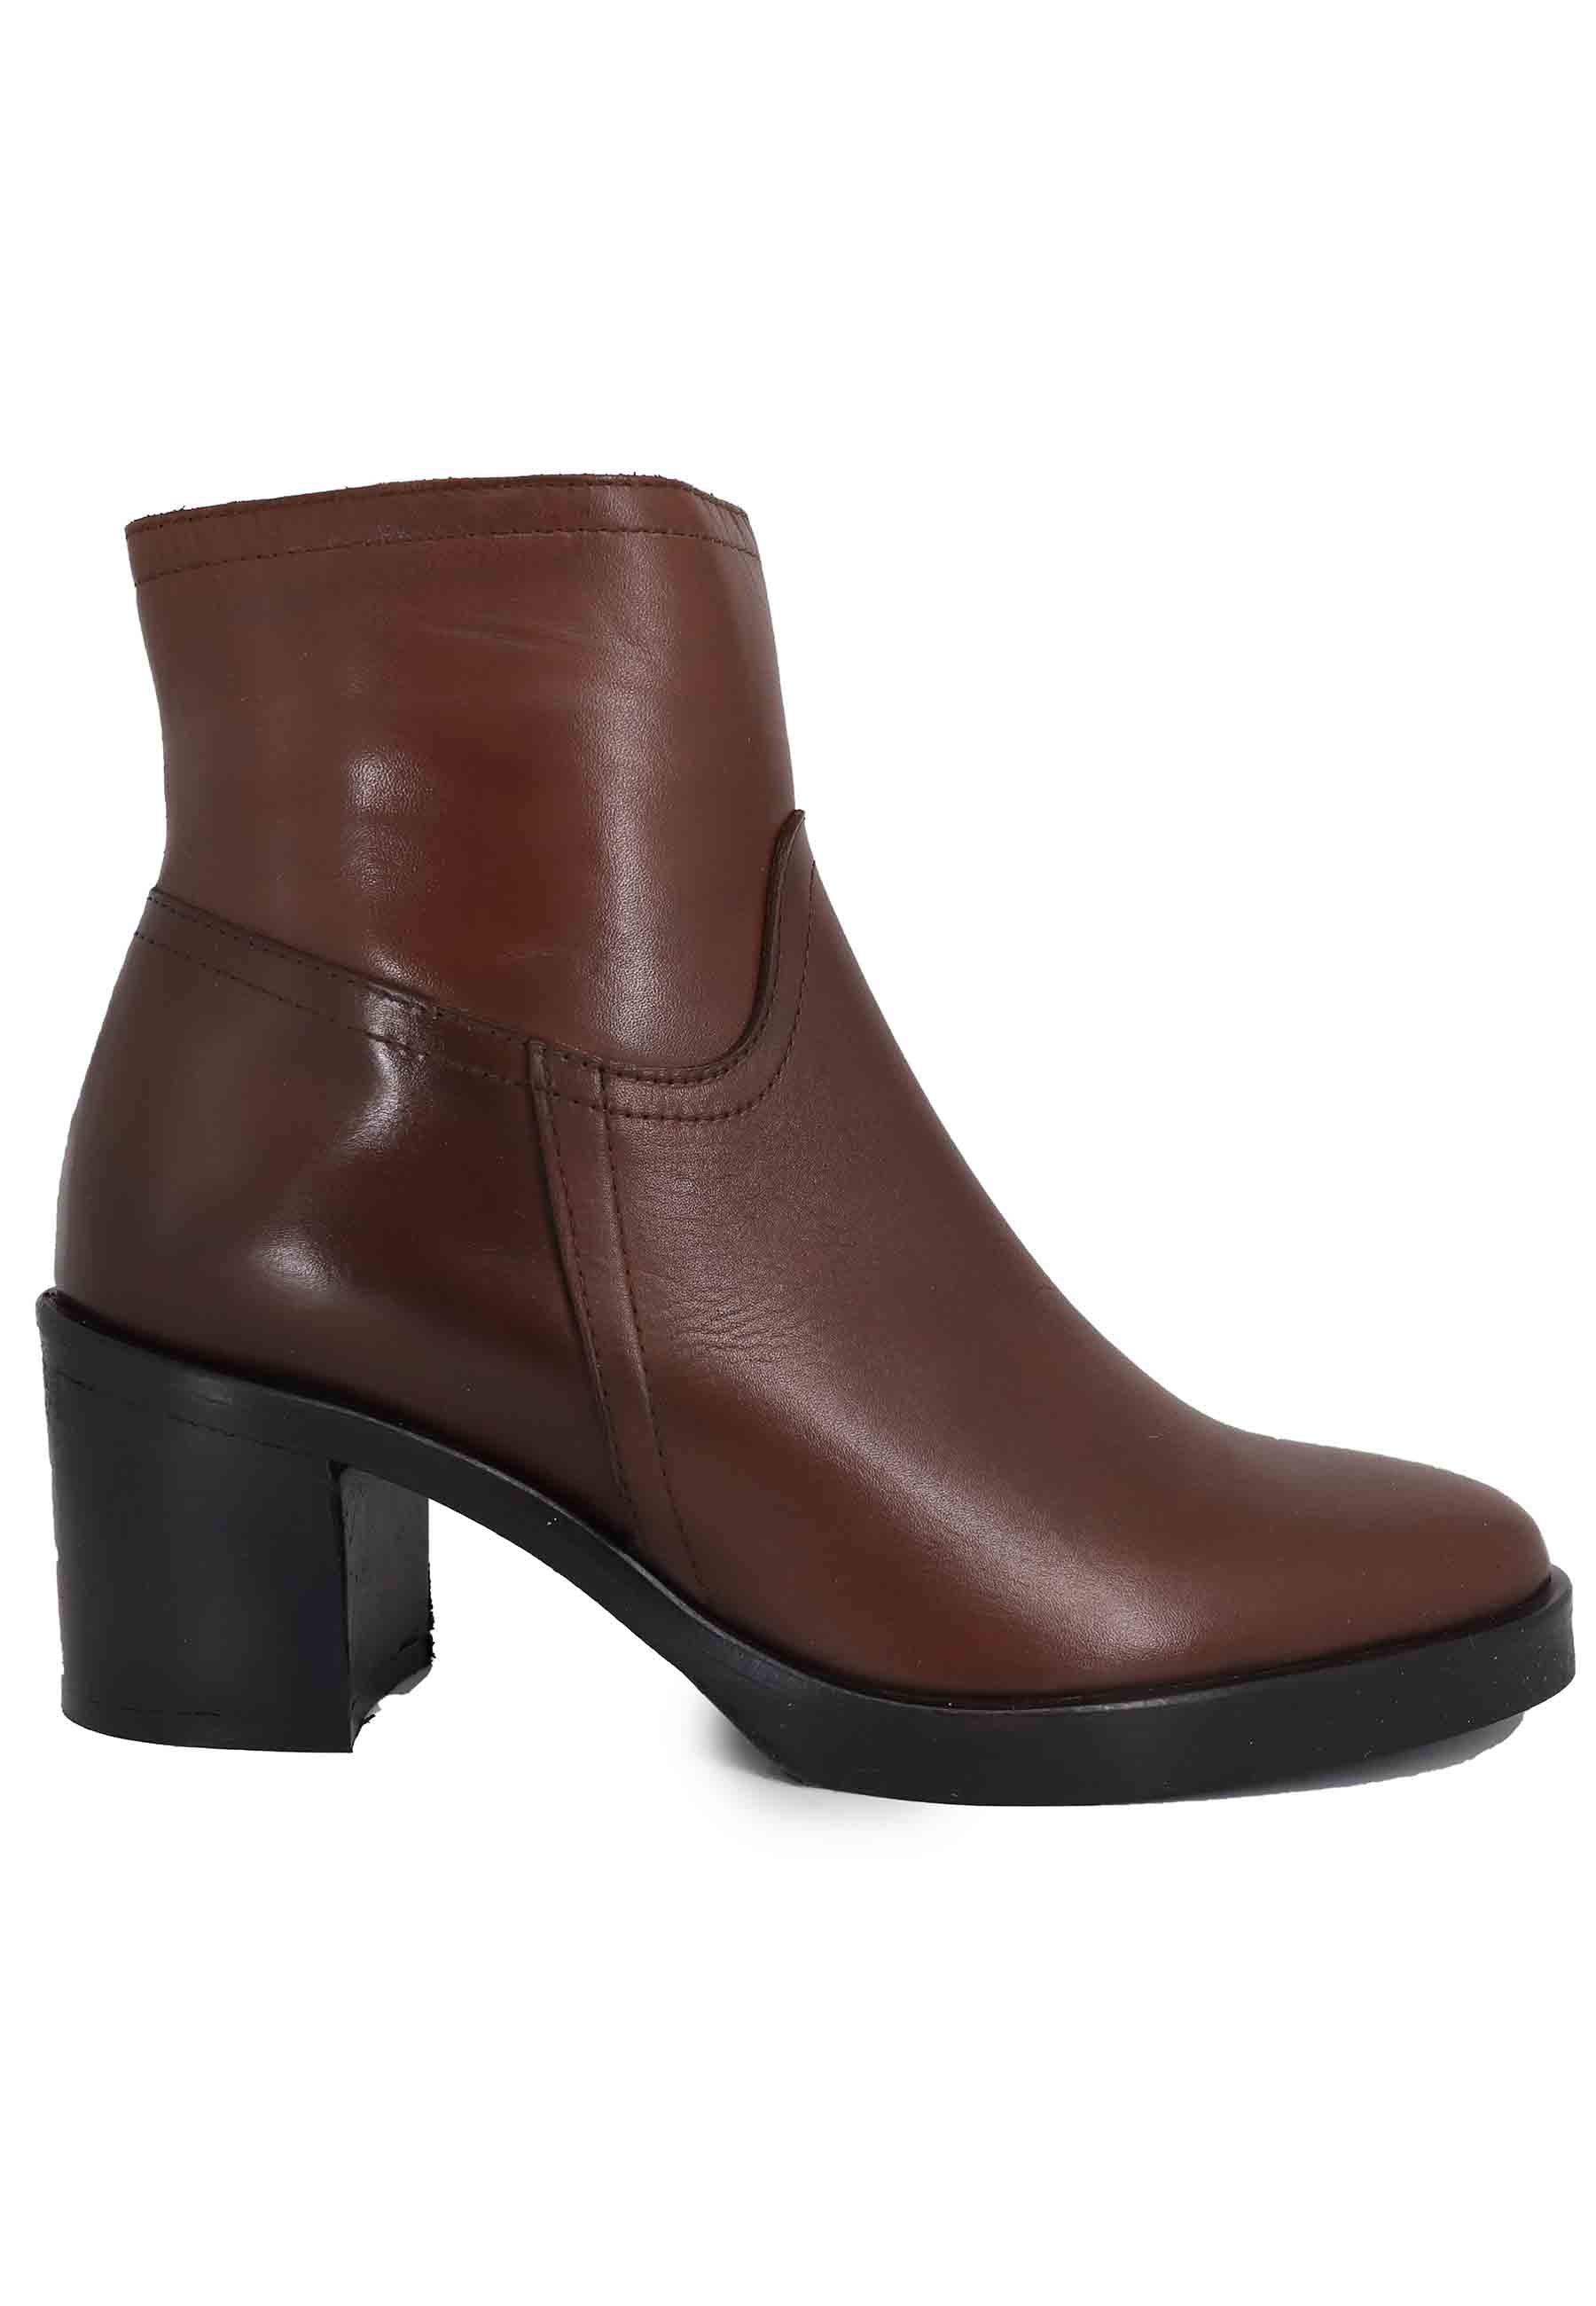 Women's brown leather ankle boots with heel and rubber sole